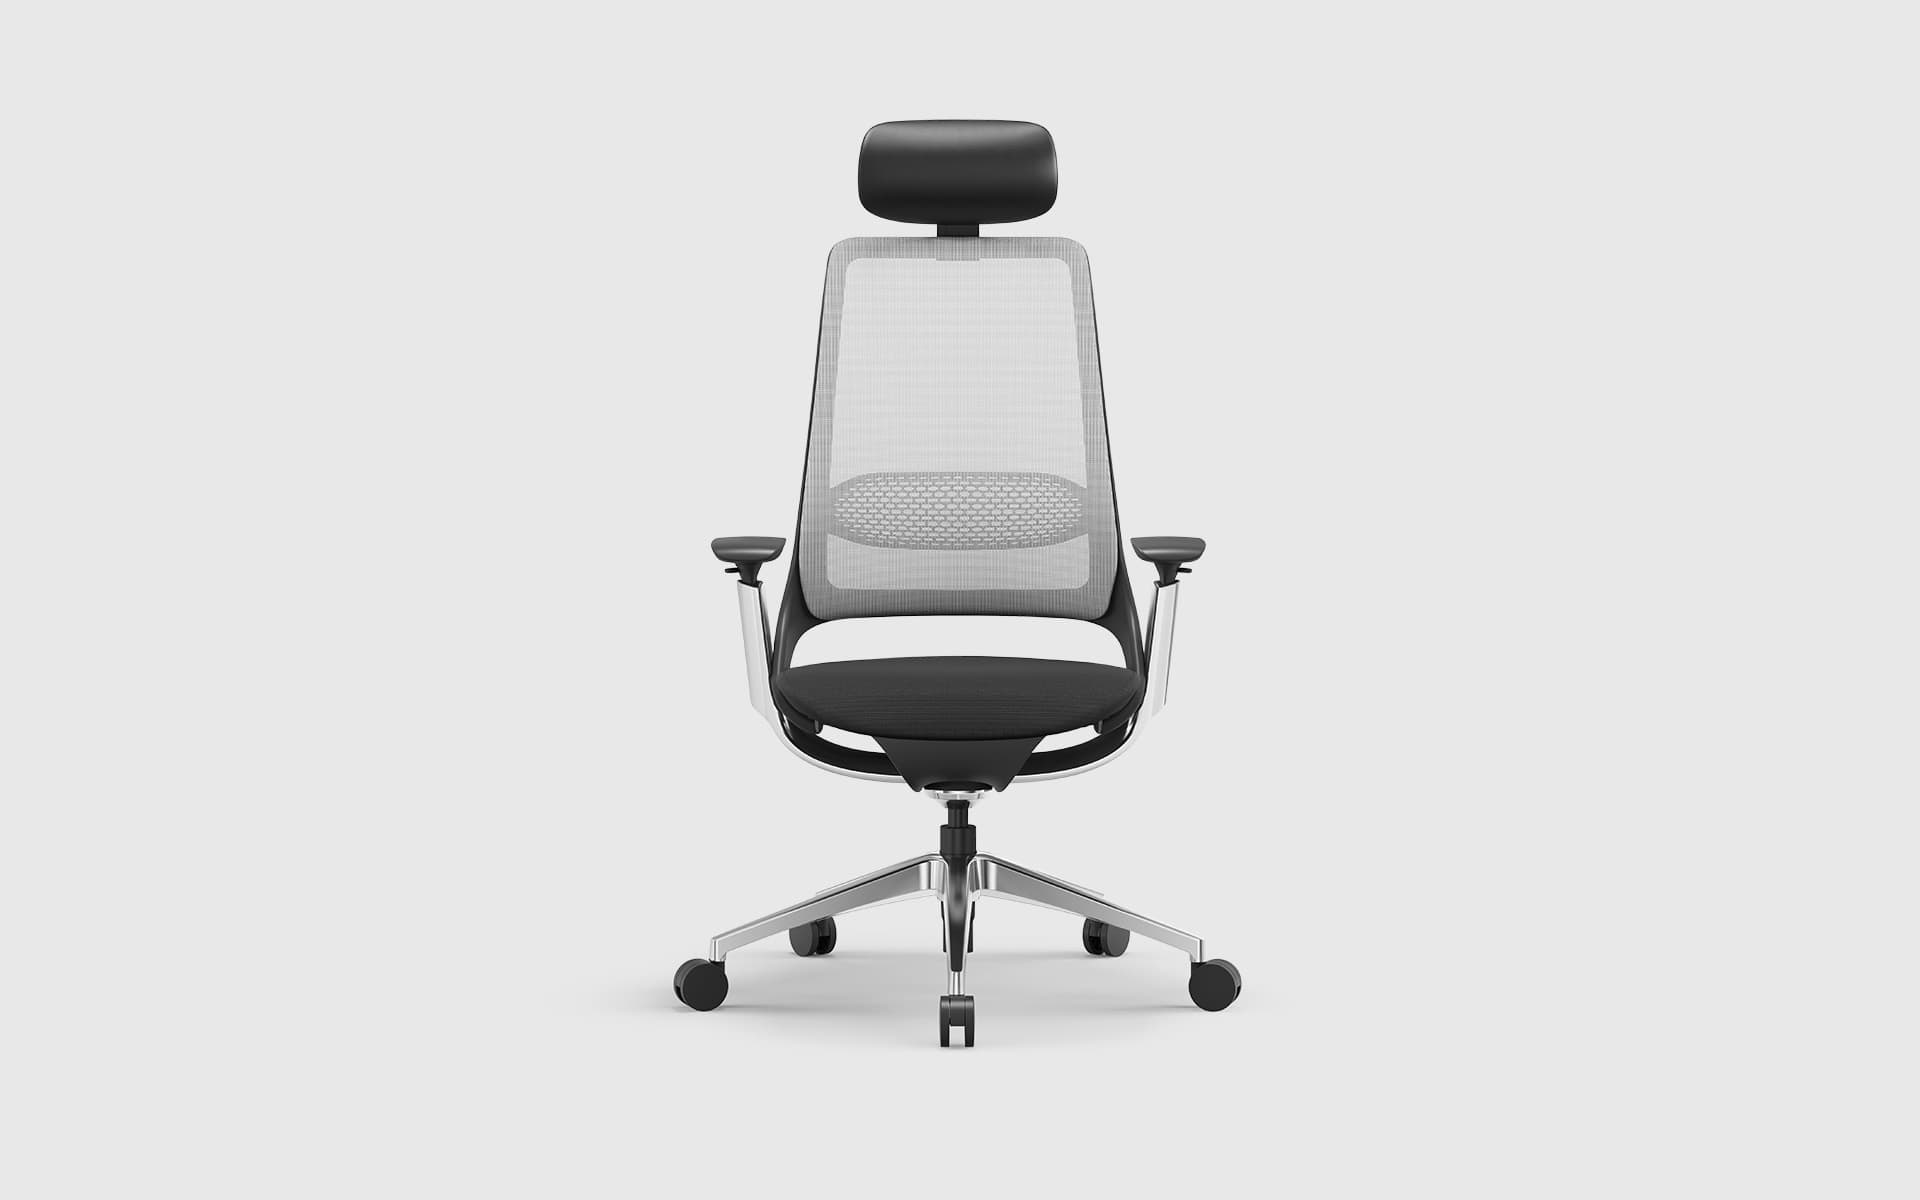 Office chair Hug designed by ITO Design for Enova in black/grey – front view